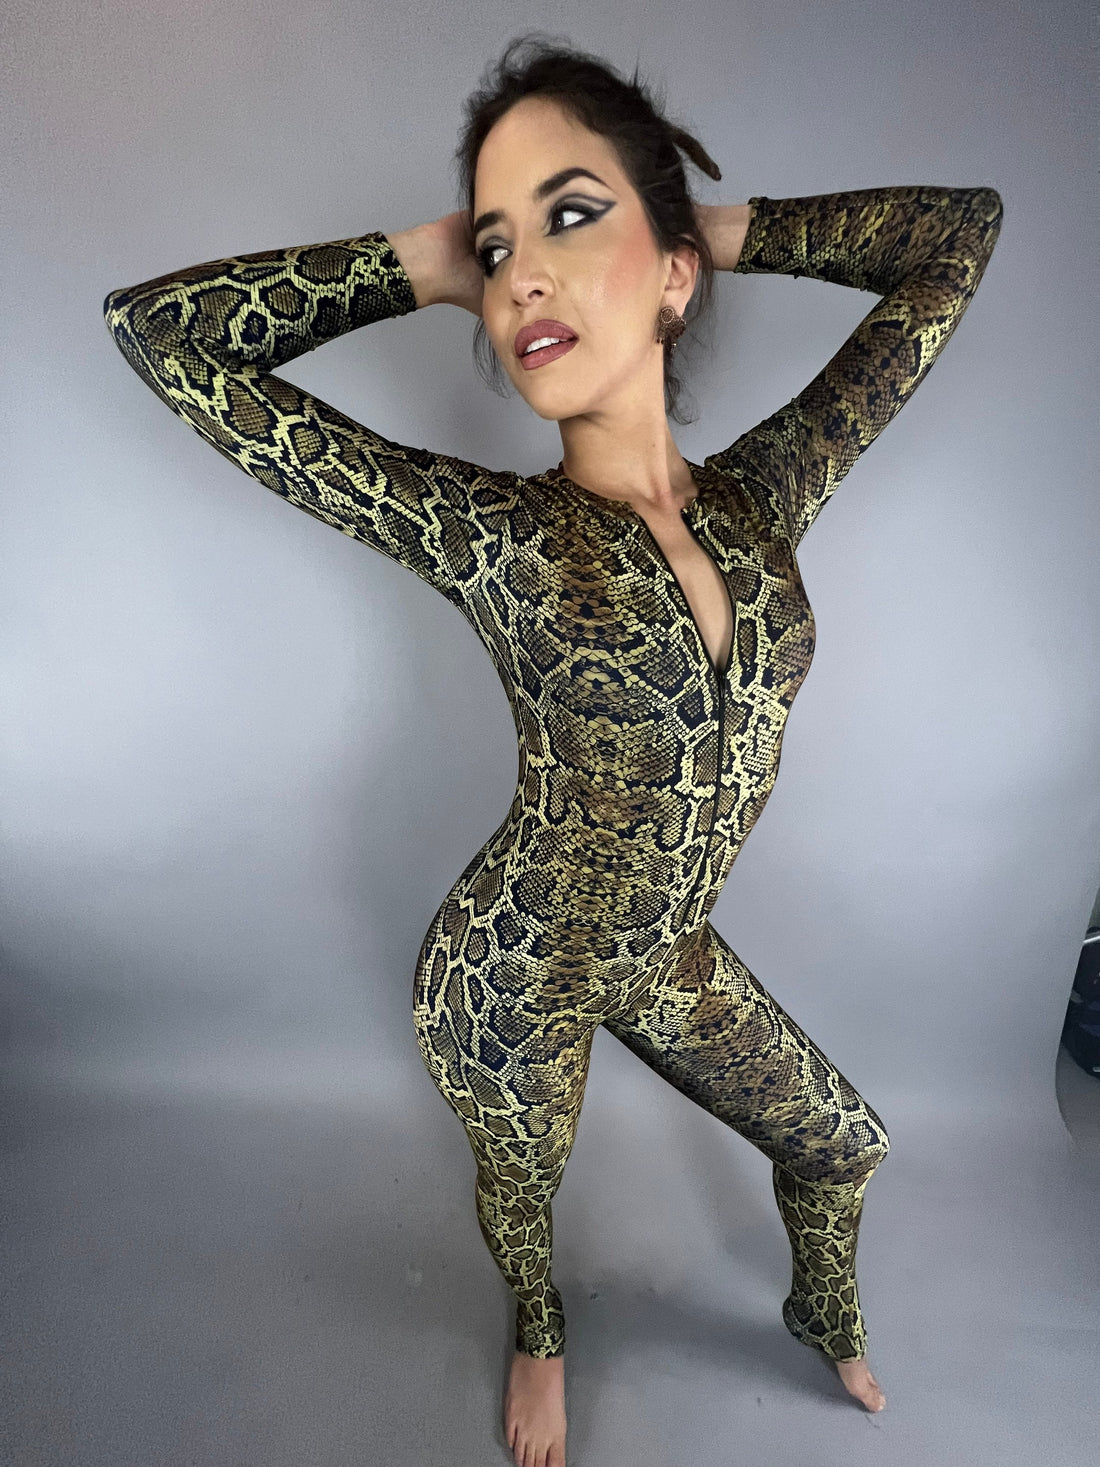 Beautiful Snake Catsuit, Watersports Wear, Yoga Clothes, Trending Now, Festival Fashion, Swimsuits, Uv Protective